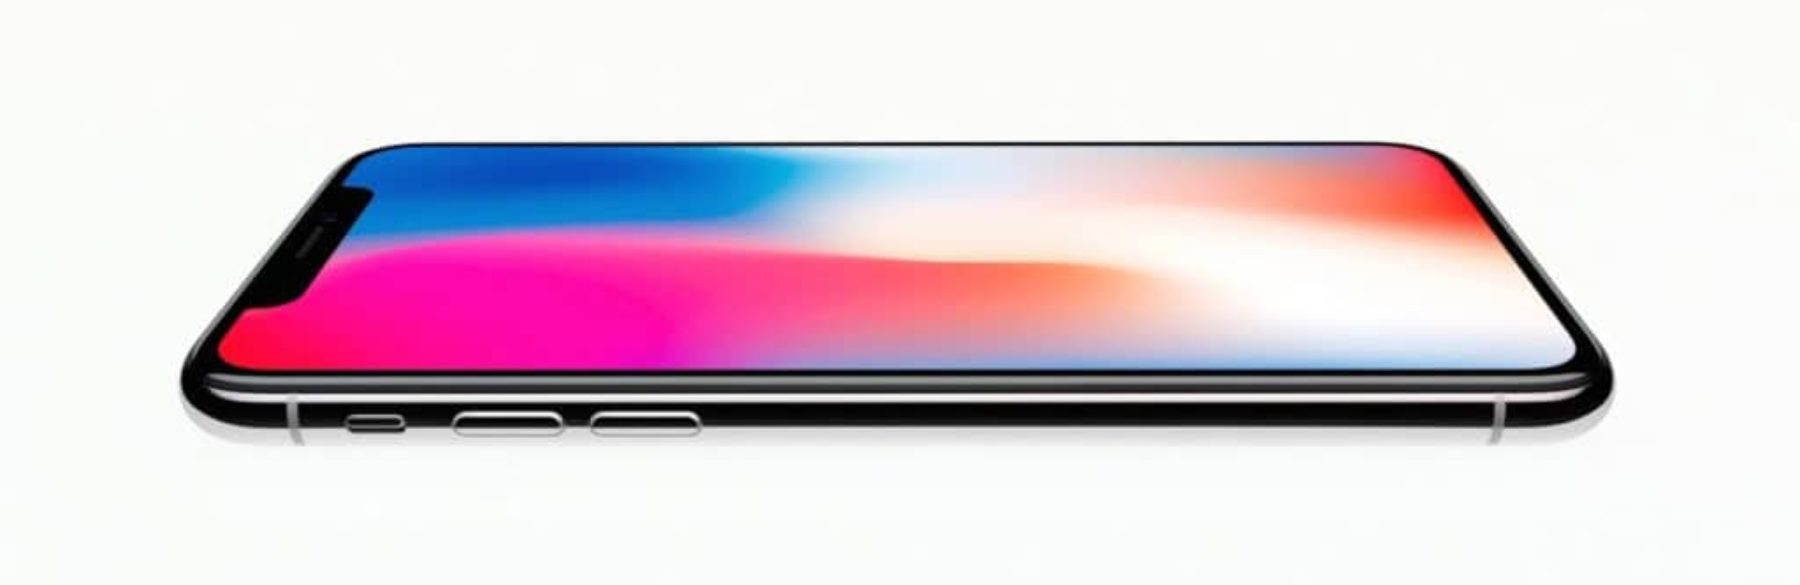 Questions You Need To Ask Before Buying iPhone X